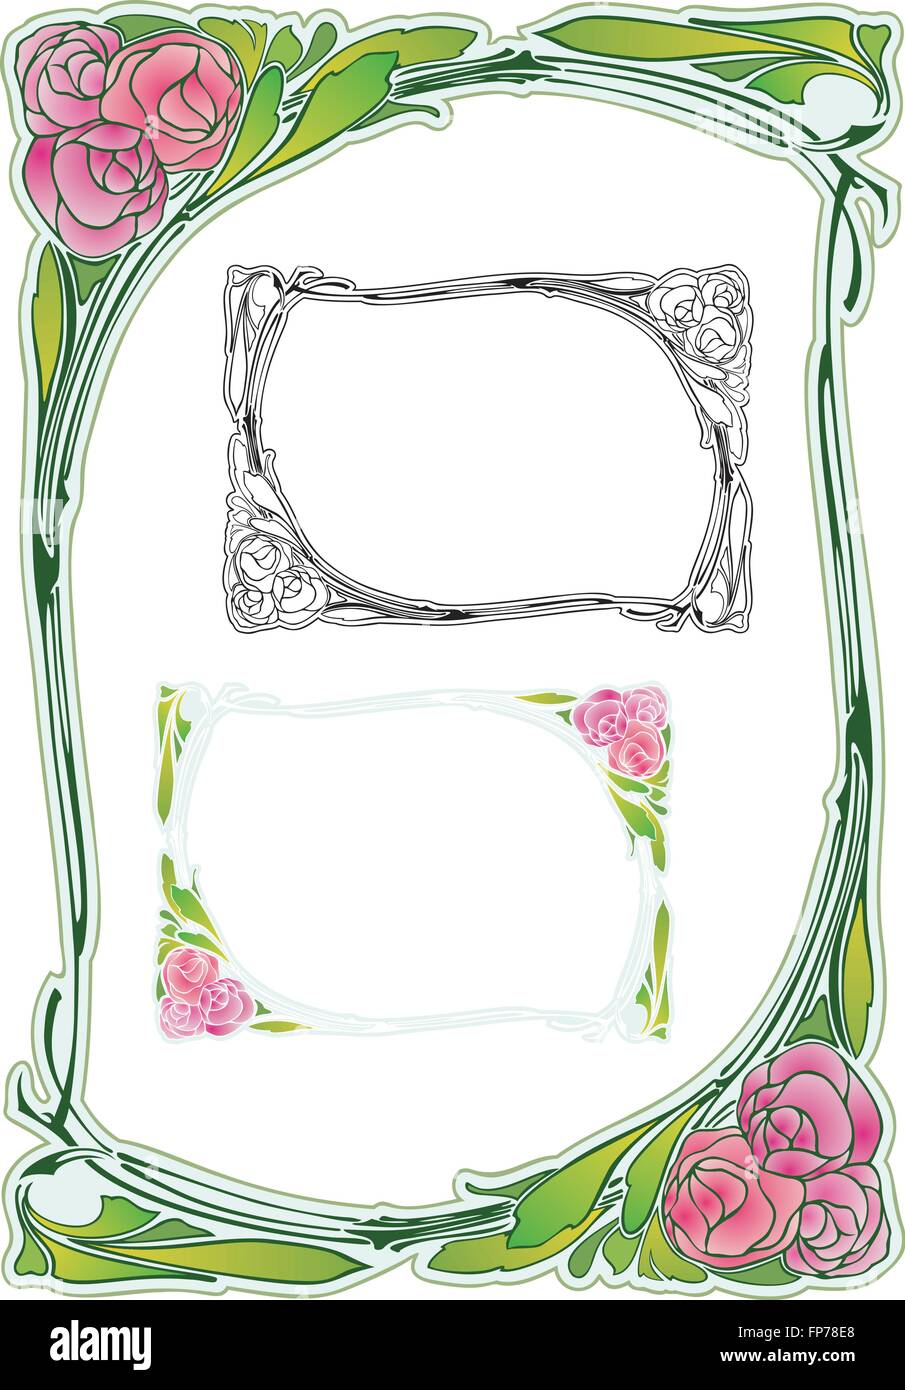 Art Nouveau Style Border With Peony Flowers Stock Vector Art